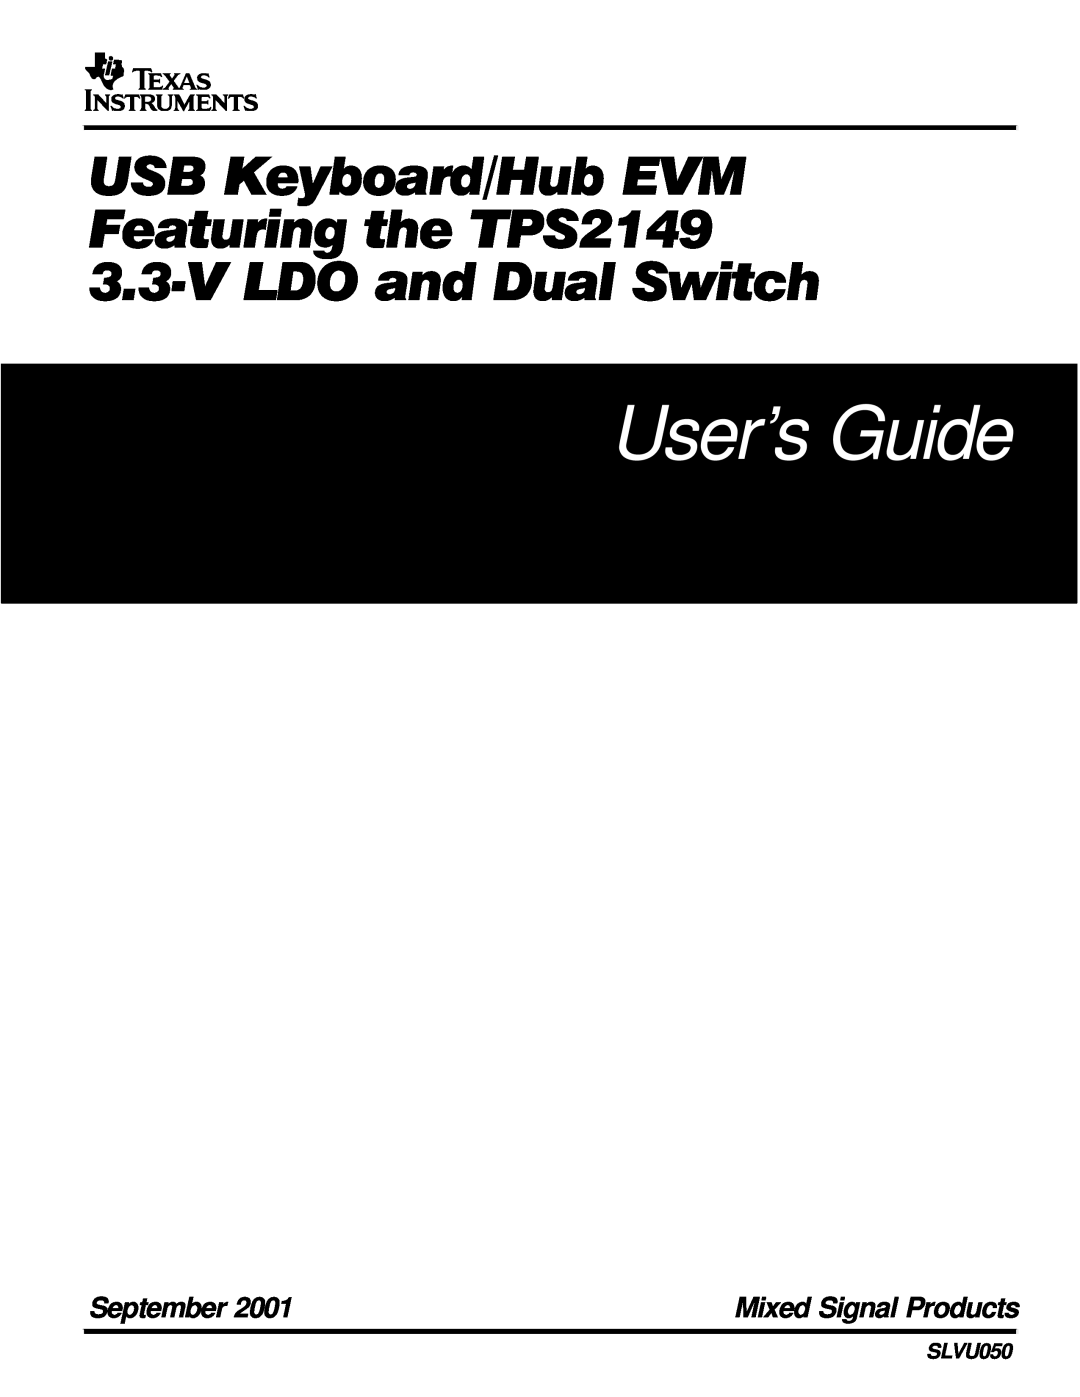 Texas Instruments TPS2149 manual User’s Guide, September, Mixed Signal Products, SLVU050 